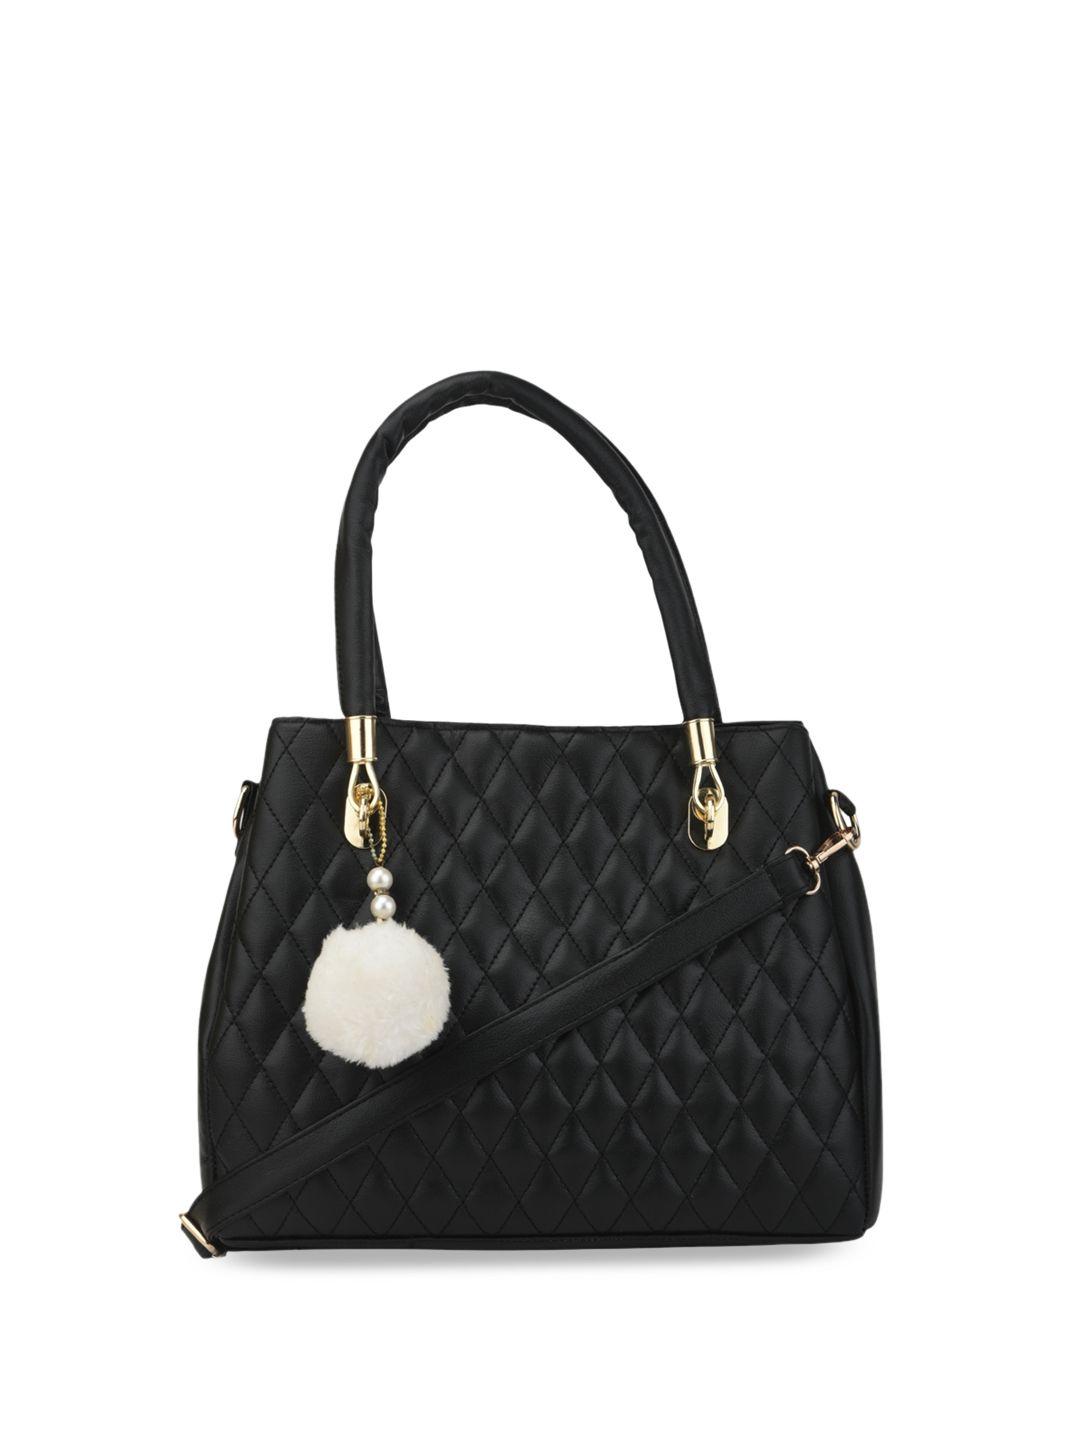 mehnam structured leather shoulder bag with quilted